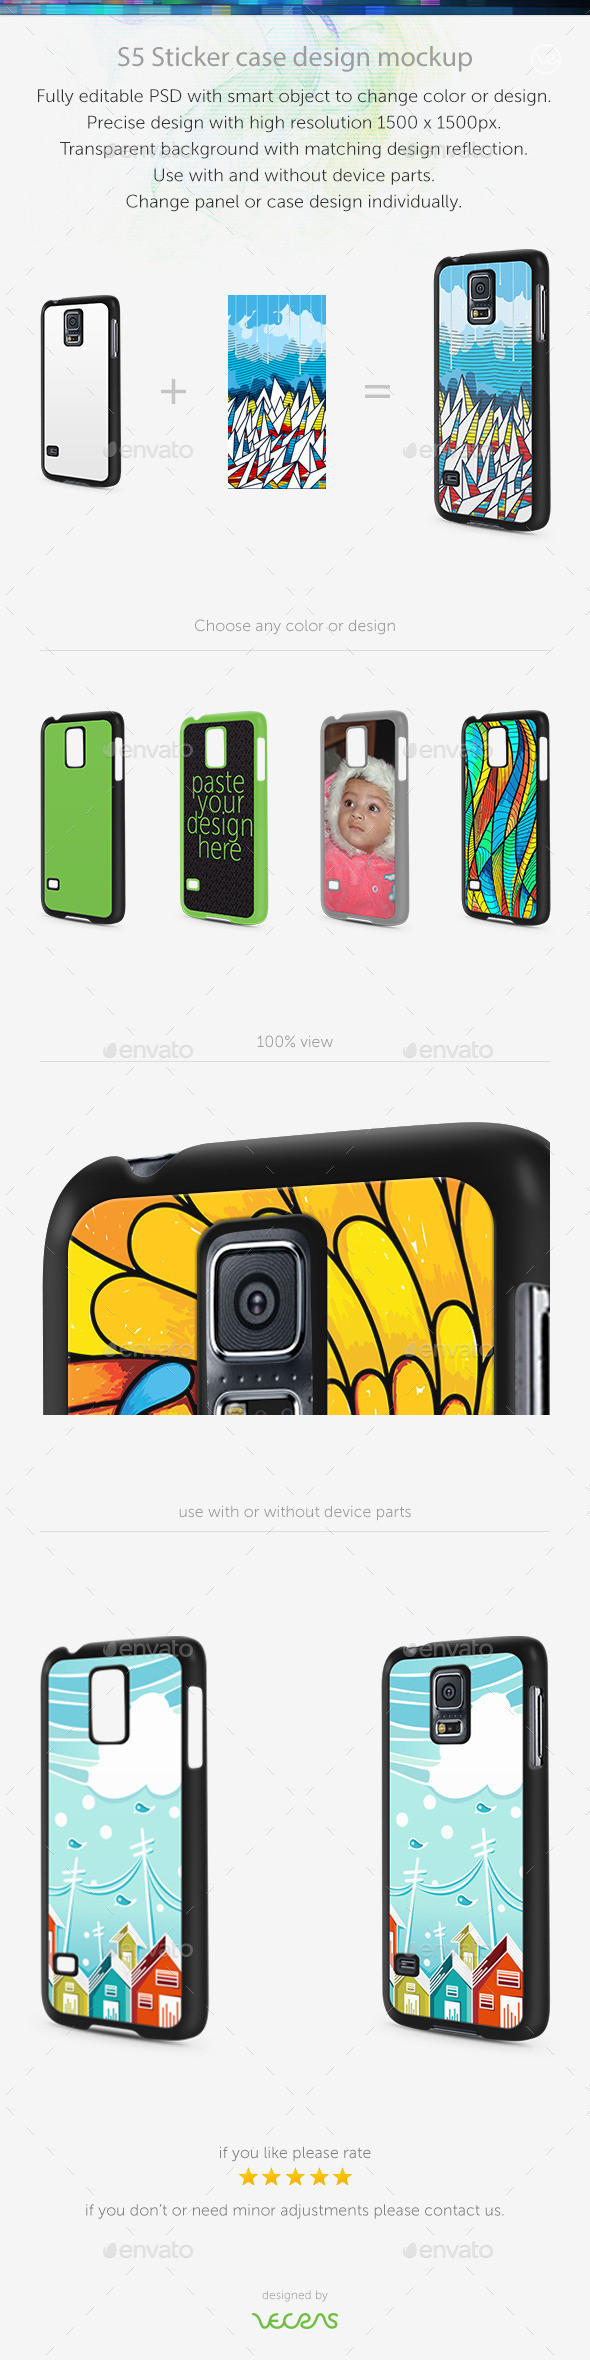 Preview s5 stickercase mockup angled